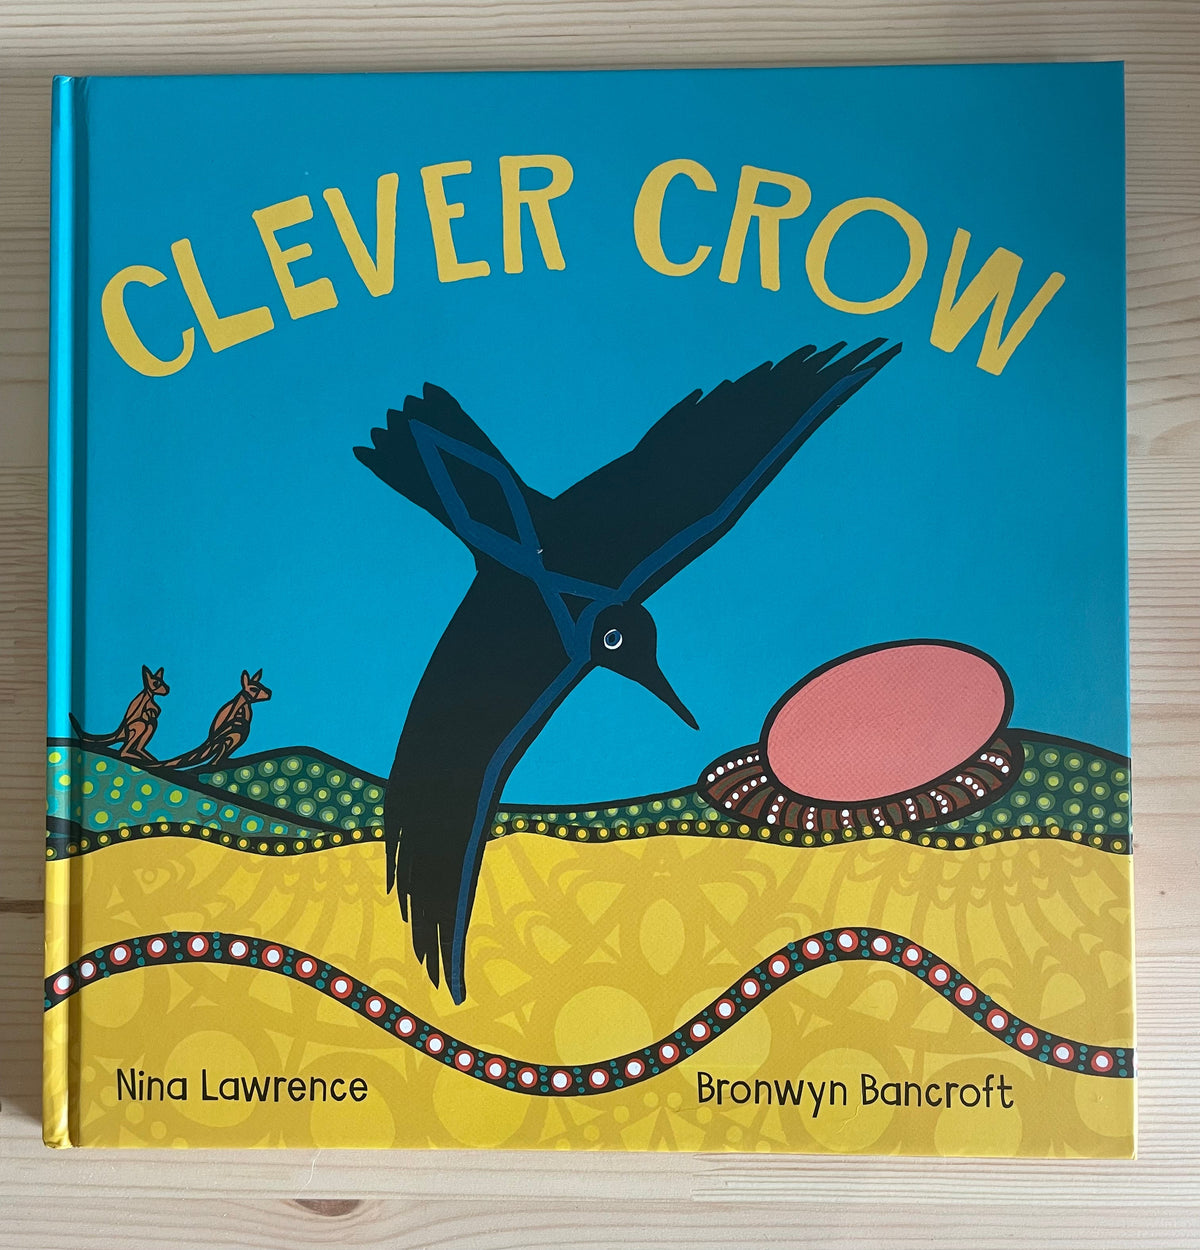 Clever Crow- Nina Lawrence